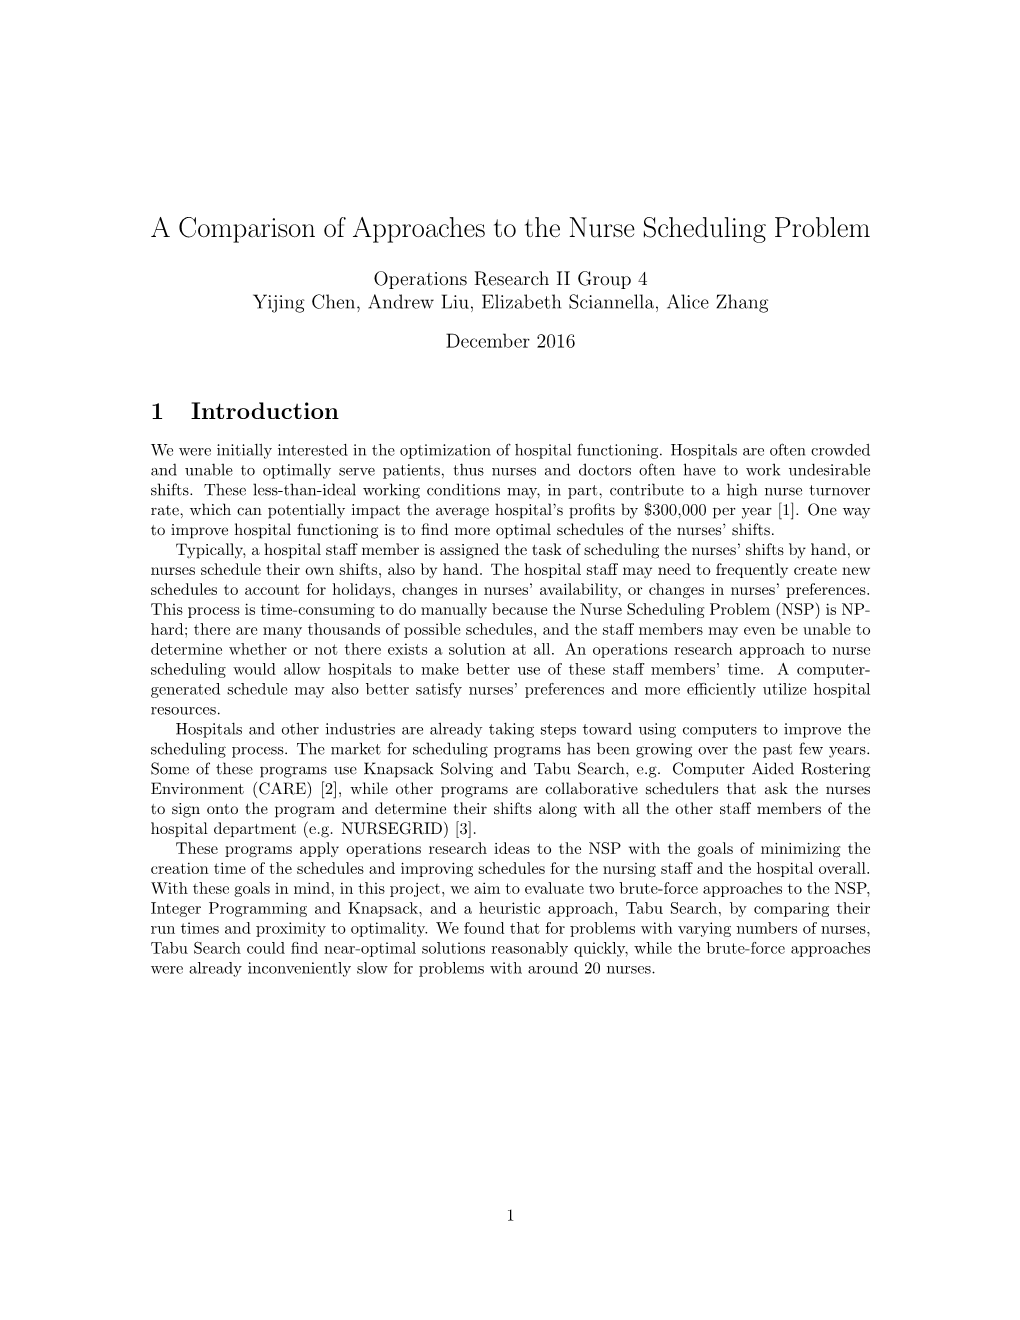 A Comparison of Approaches to the Nurse Scheduling Problem